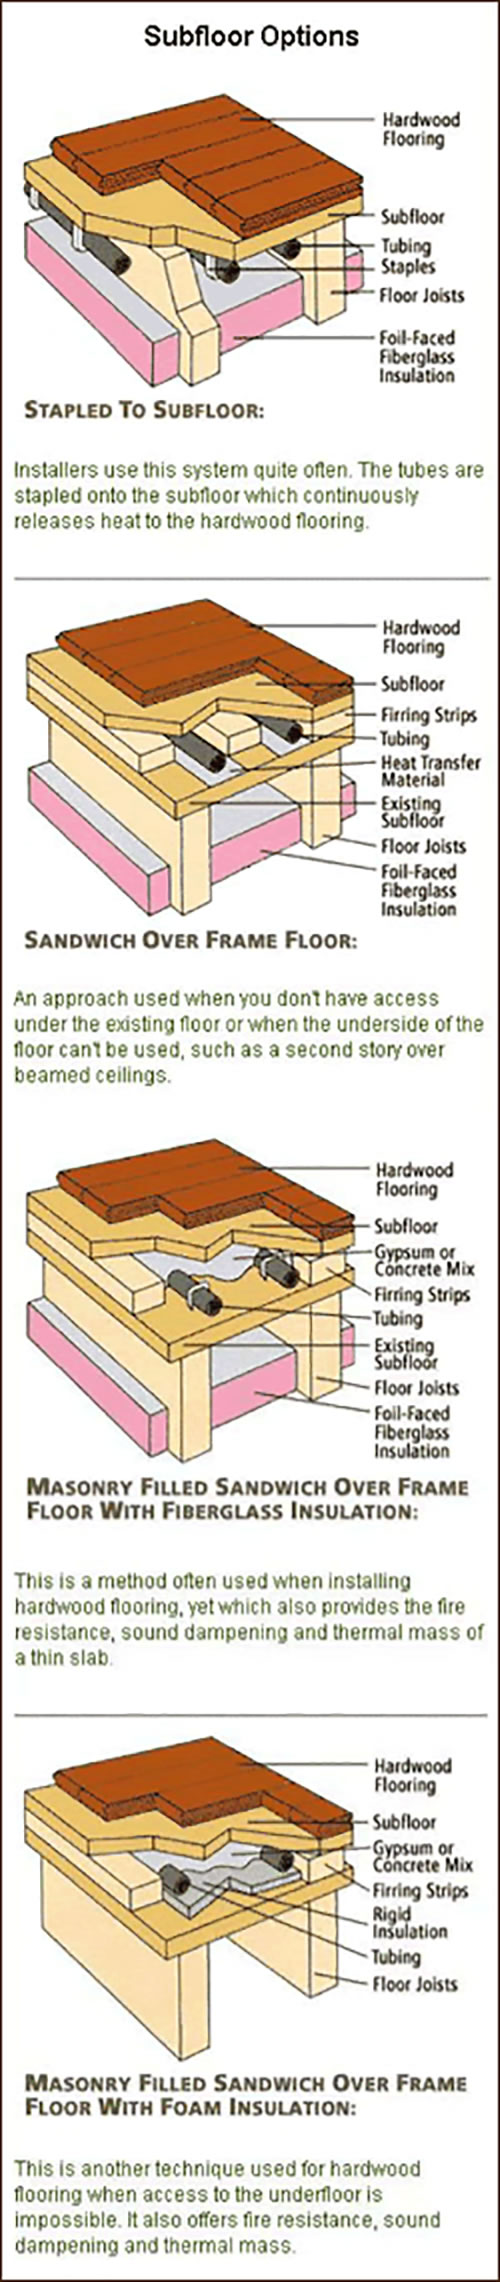 How To Install Hardwood Floors Over, Can You Install Engineered Hardwood Over Radiant Heaters